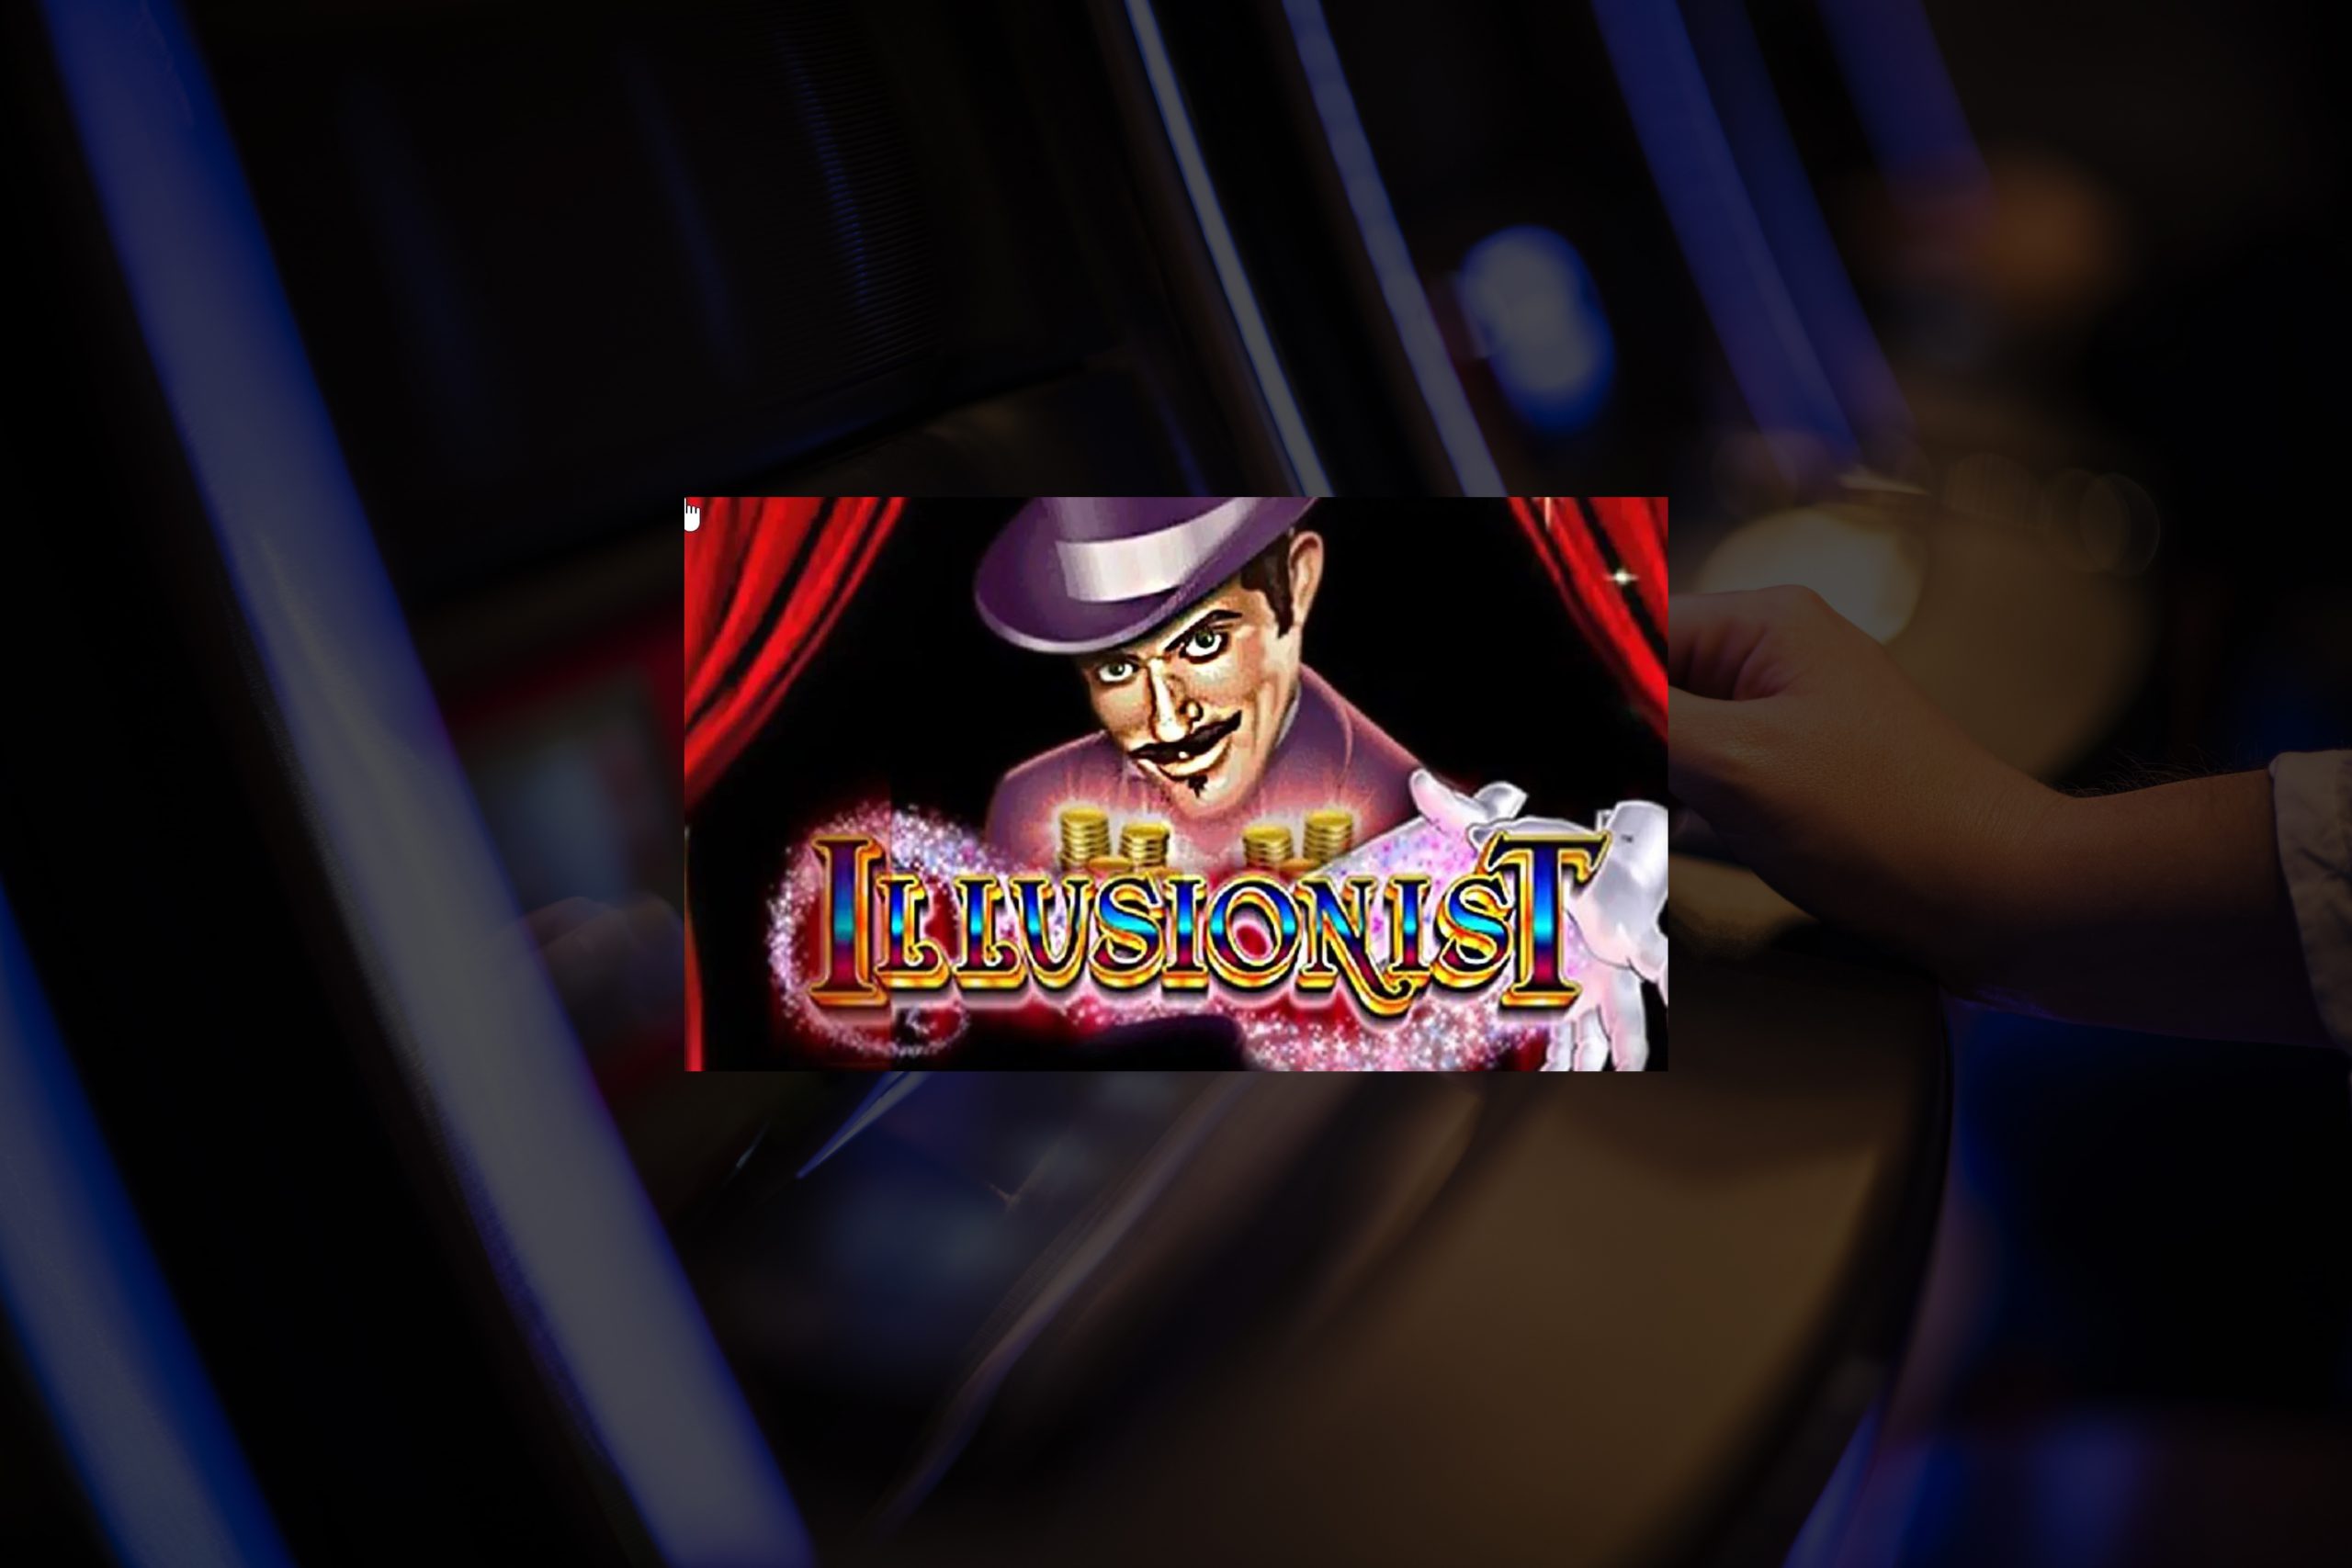 Illusionist Slot Not on Gamstop